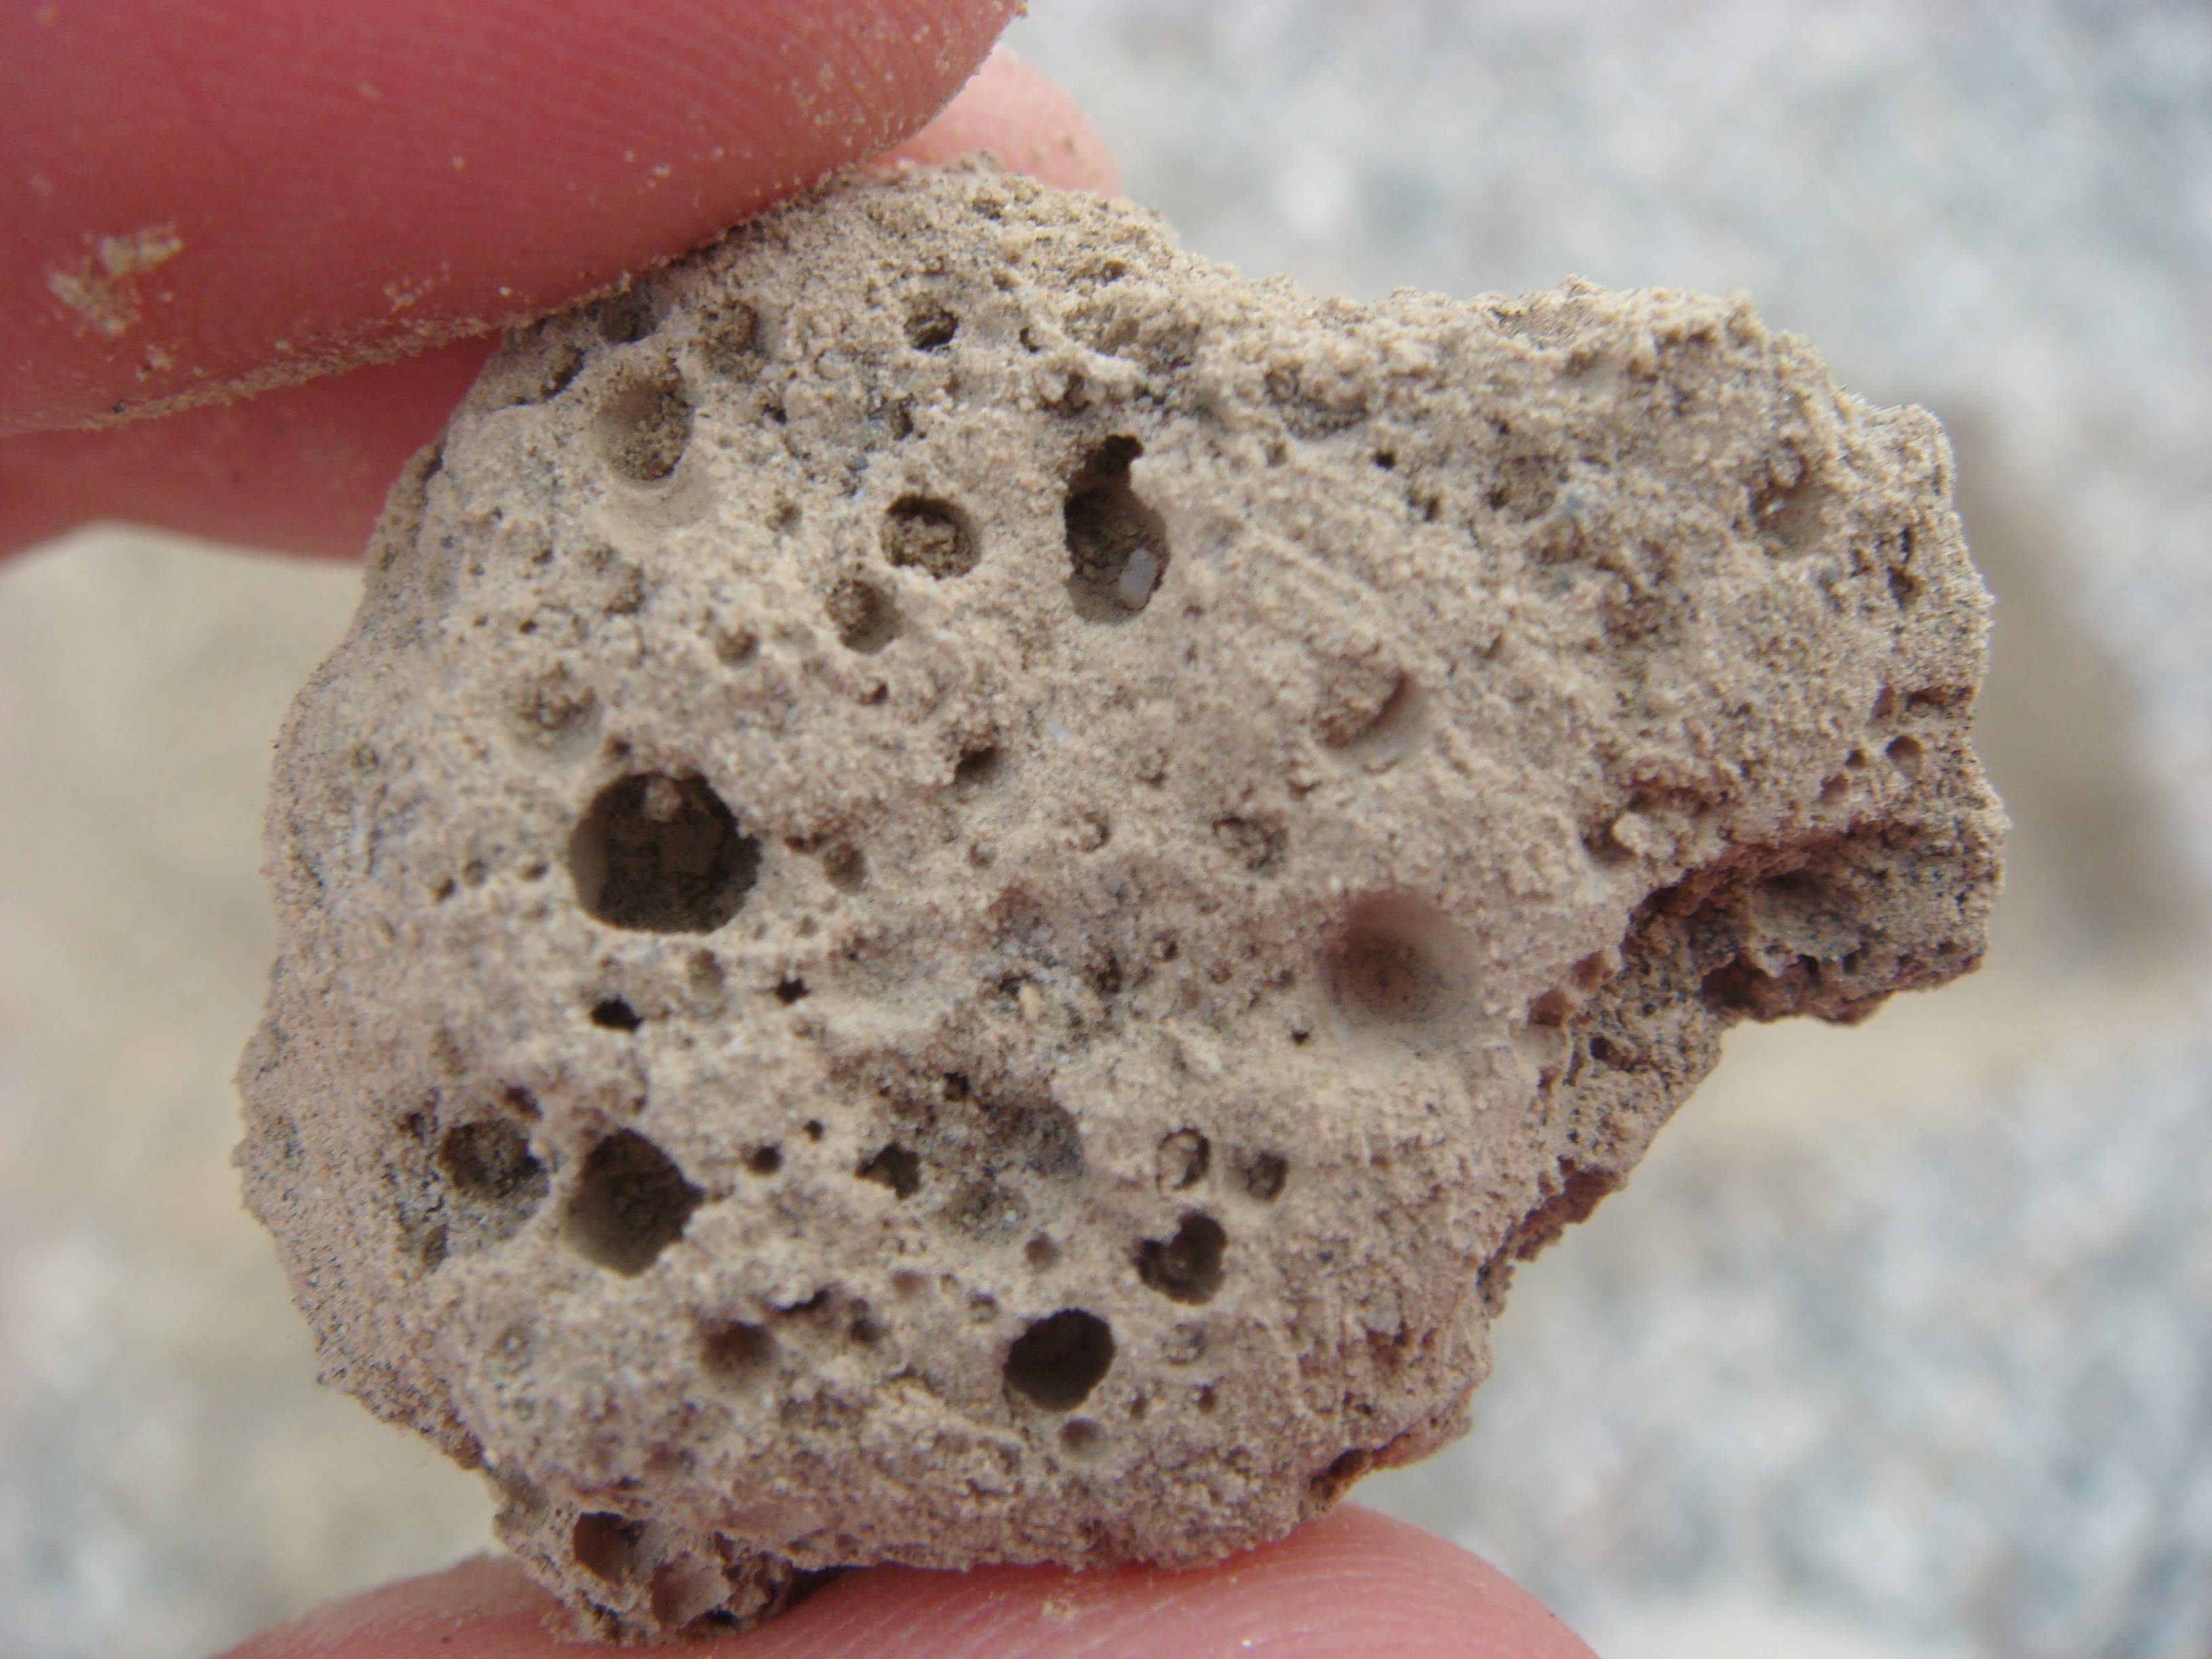 Bubble-like pores are characteristics of desert soil found in the vesicular horizon, which University of Nebraska-Lincoln School of Natural Resources assistant professor Judy Turk has extensively researched. 